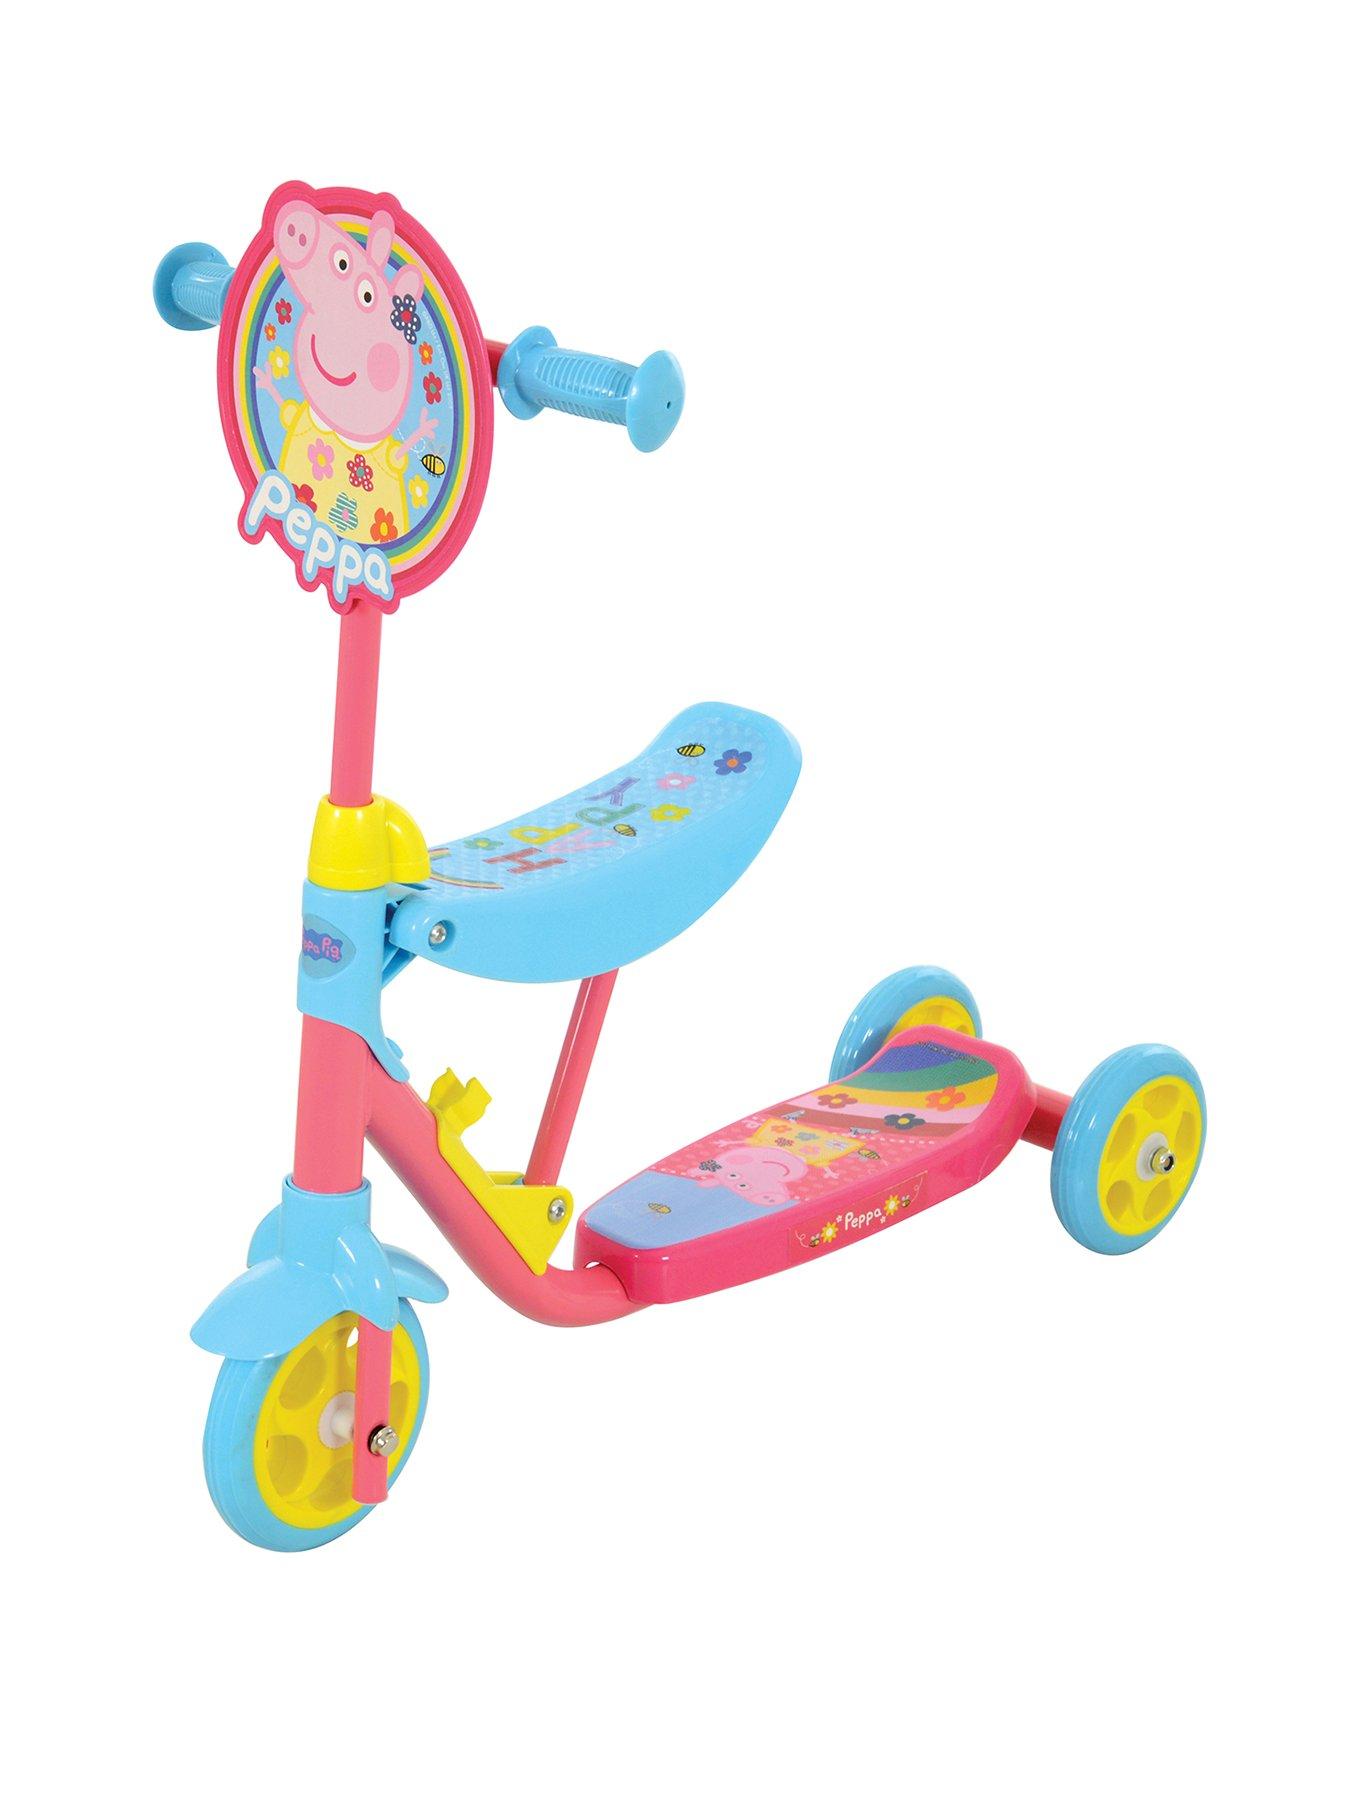 boys peppa pig scooter